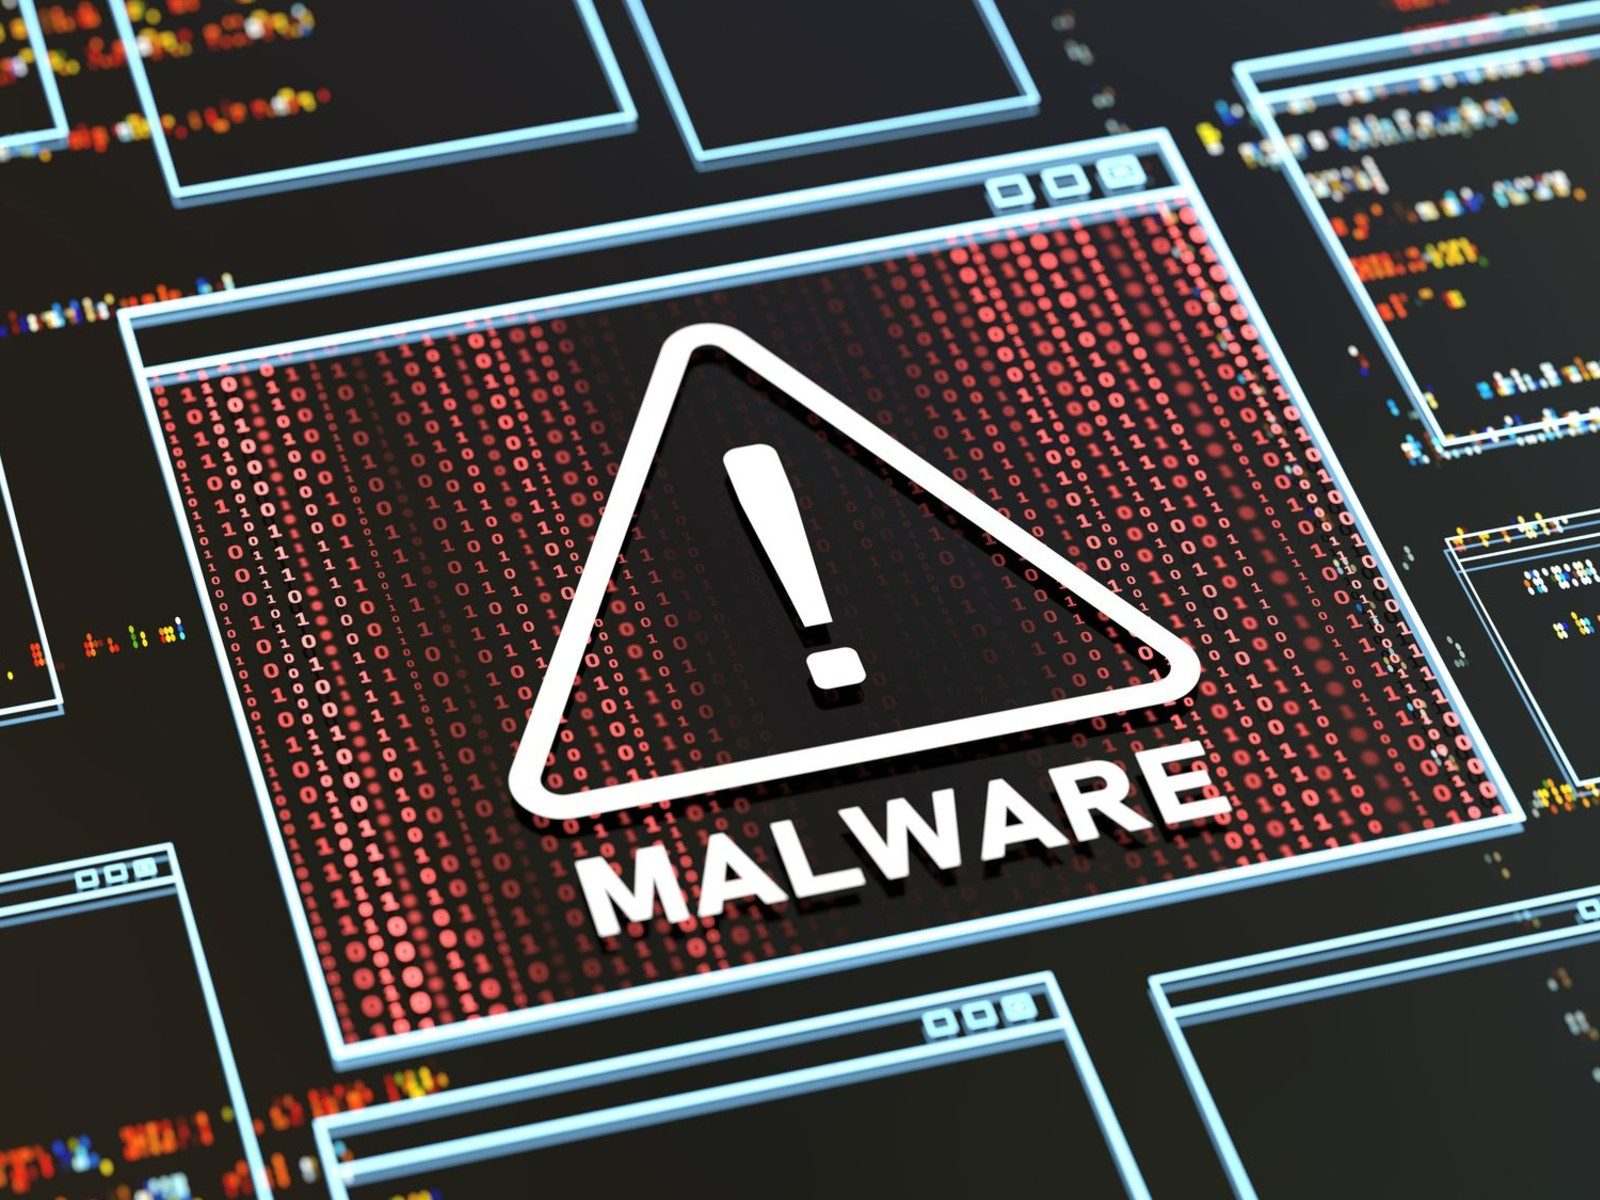 Android security: Six more apps containing Joker malware removed